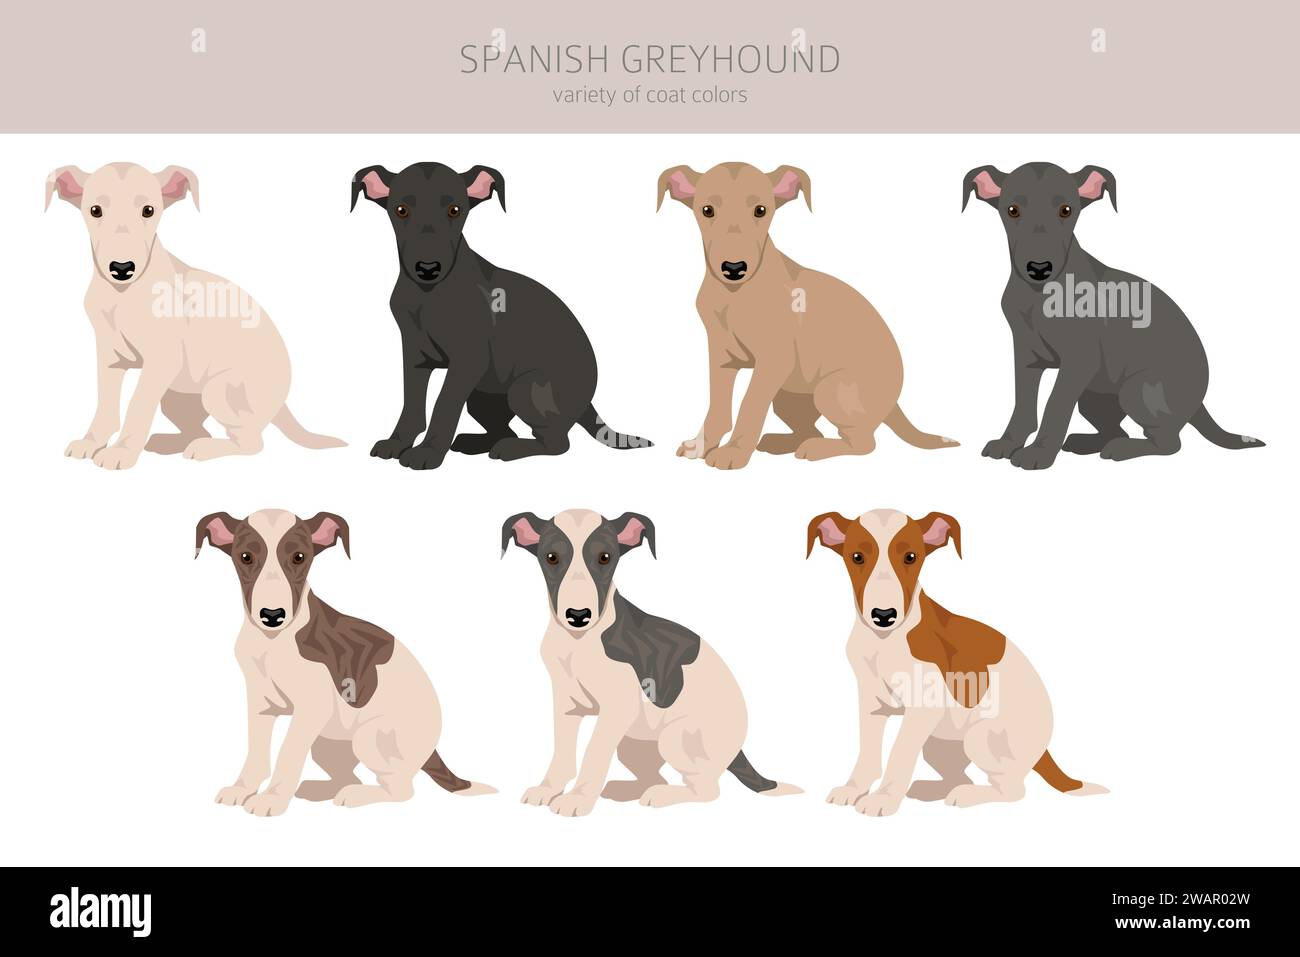 Spanish Greyhound puppies clipart. All coat colors set. All dog breeds ...